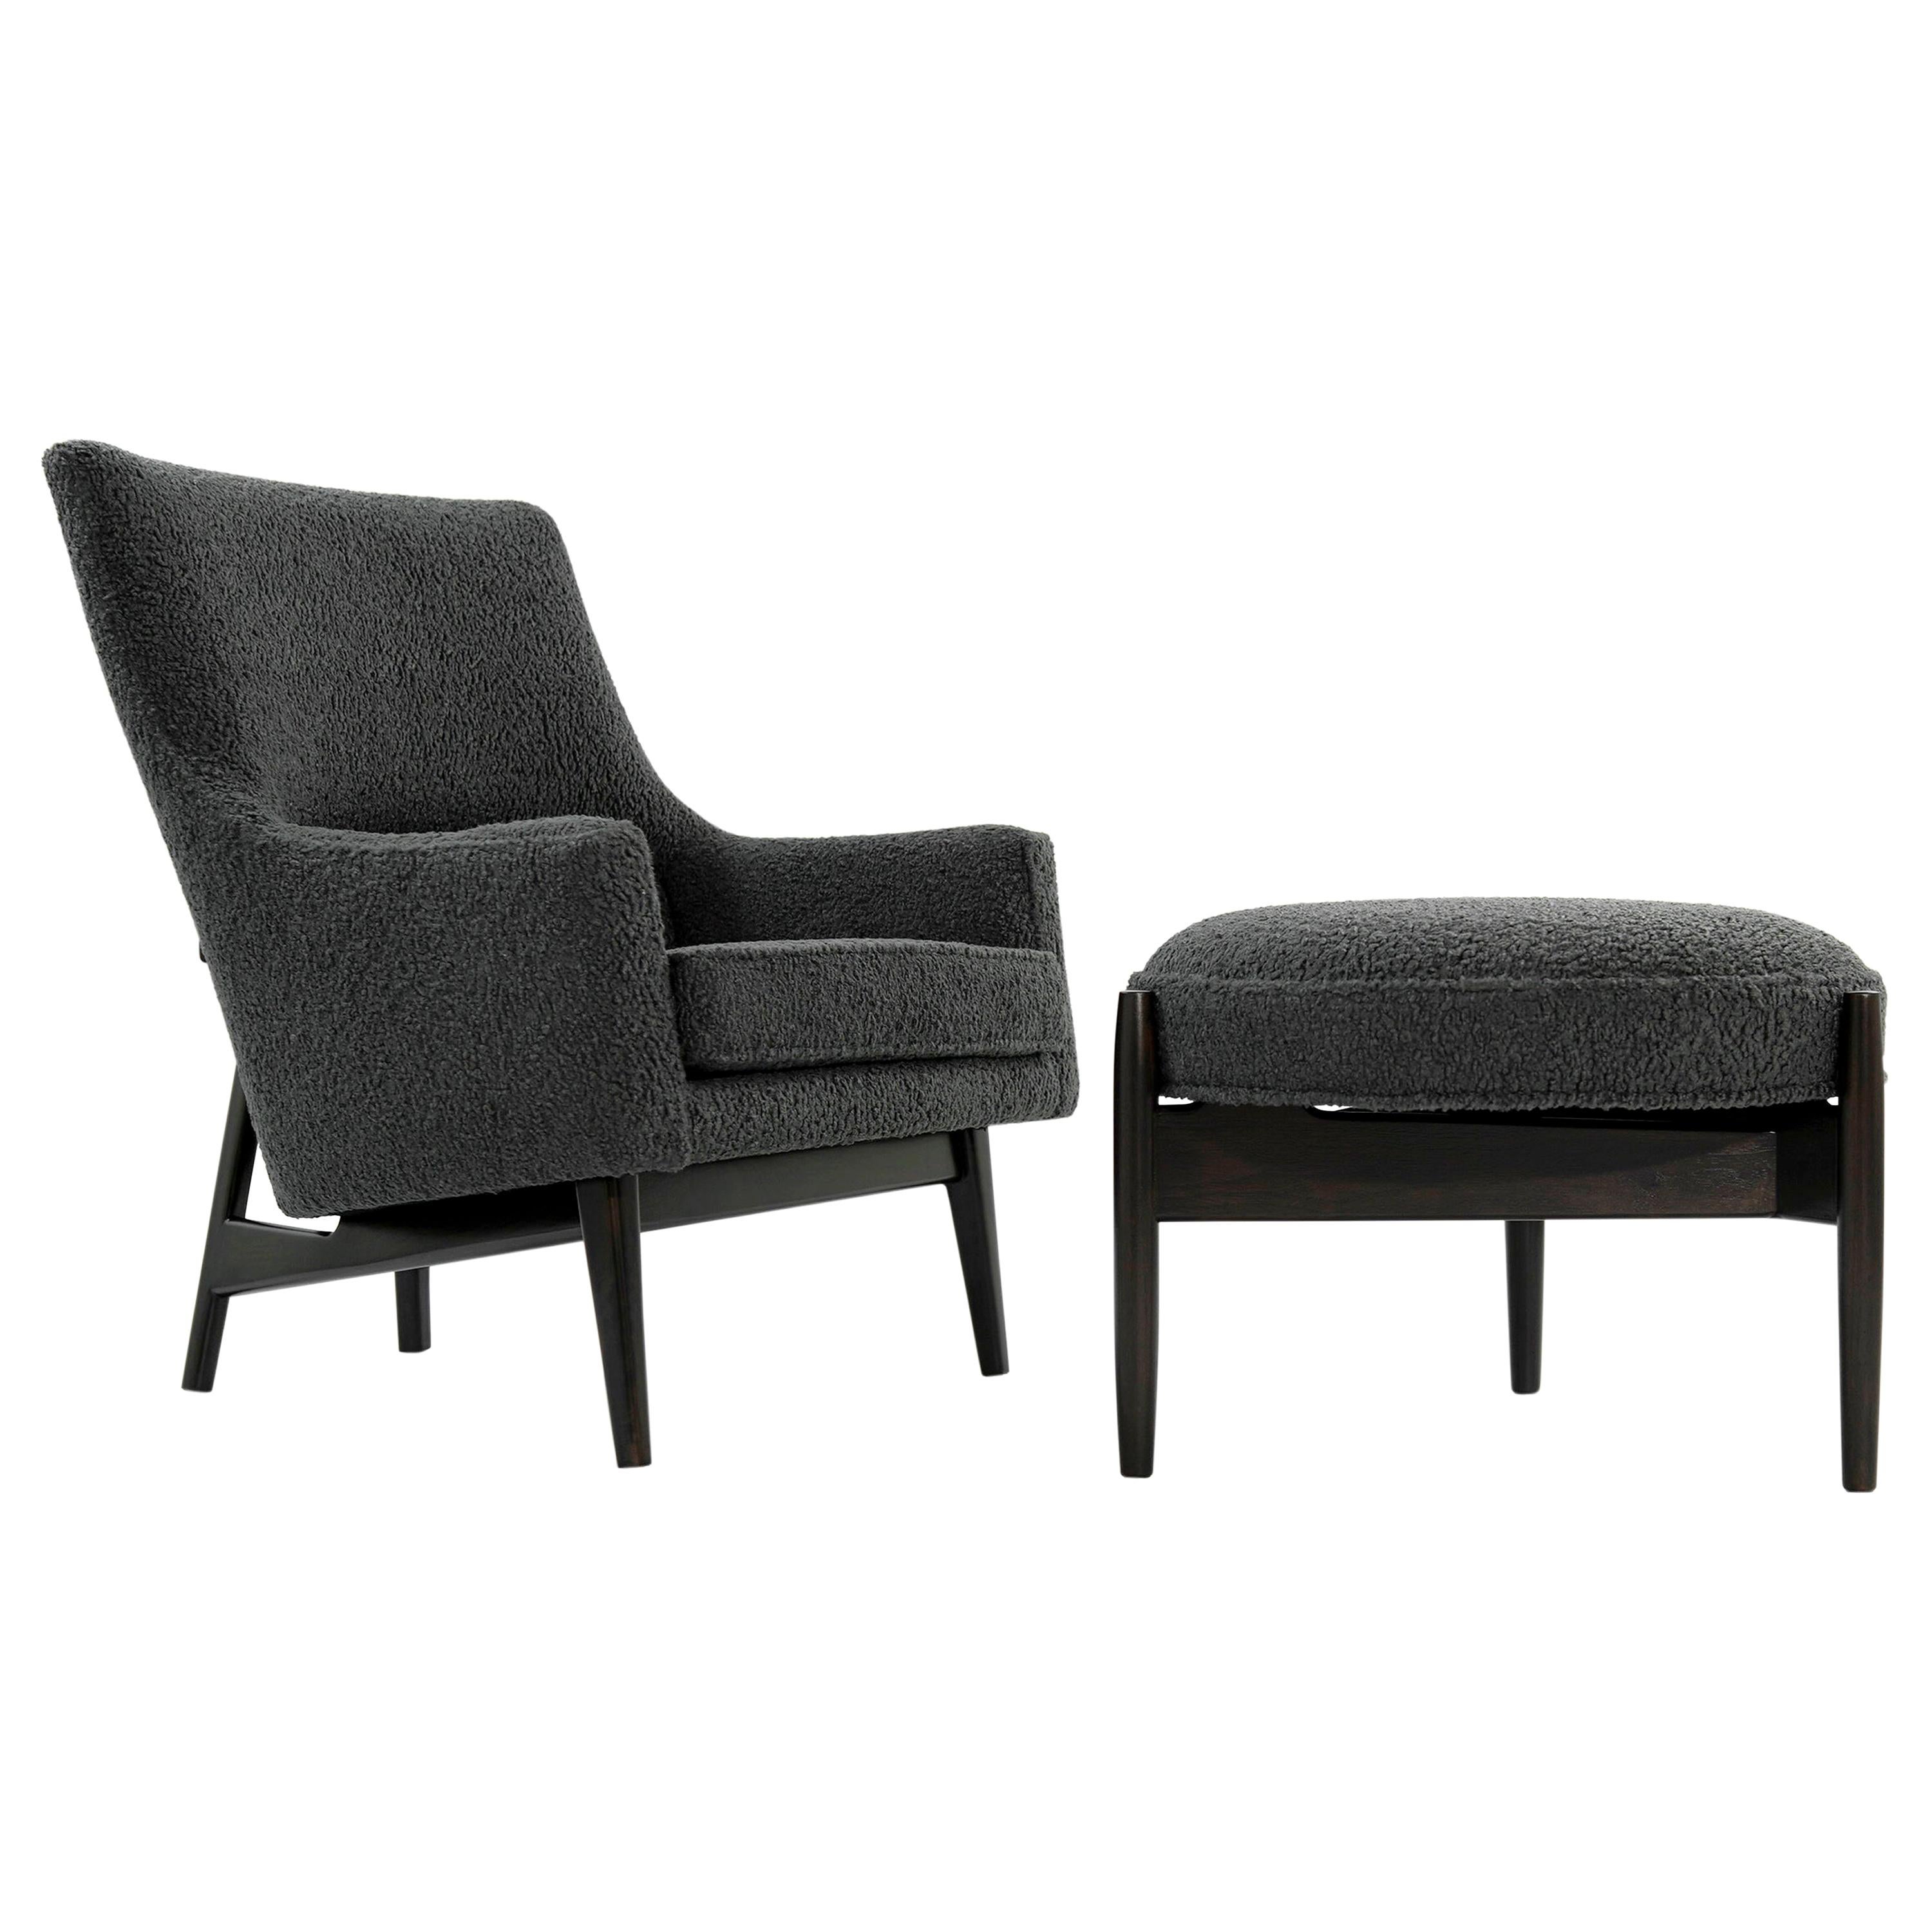 Jens Risom A-Line Lounge Chair and Ottoman in Bouclé, circa 1950s